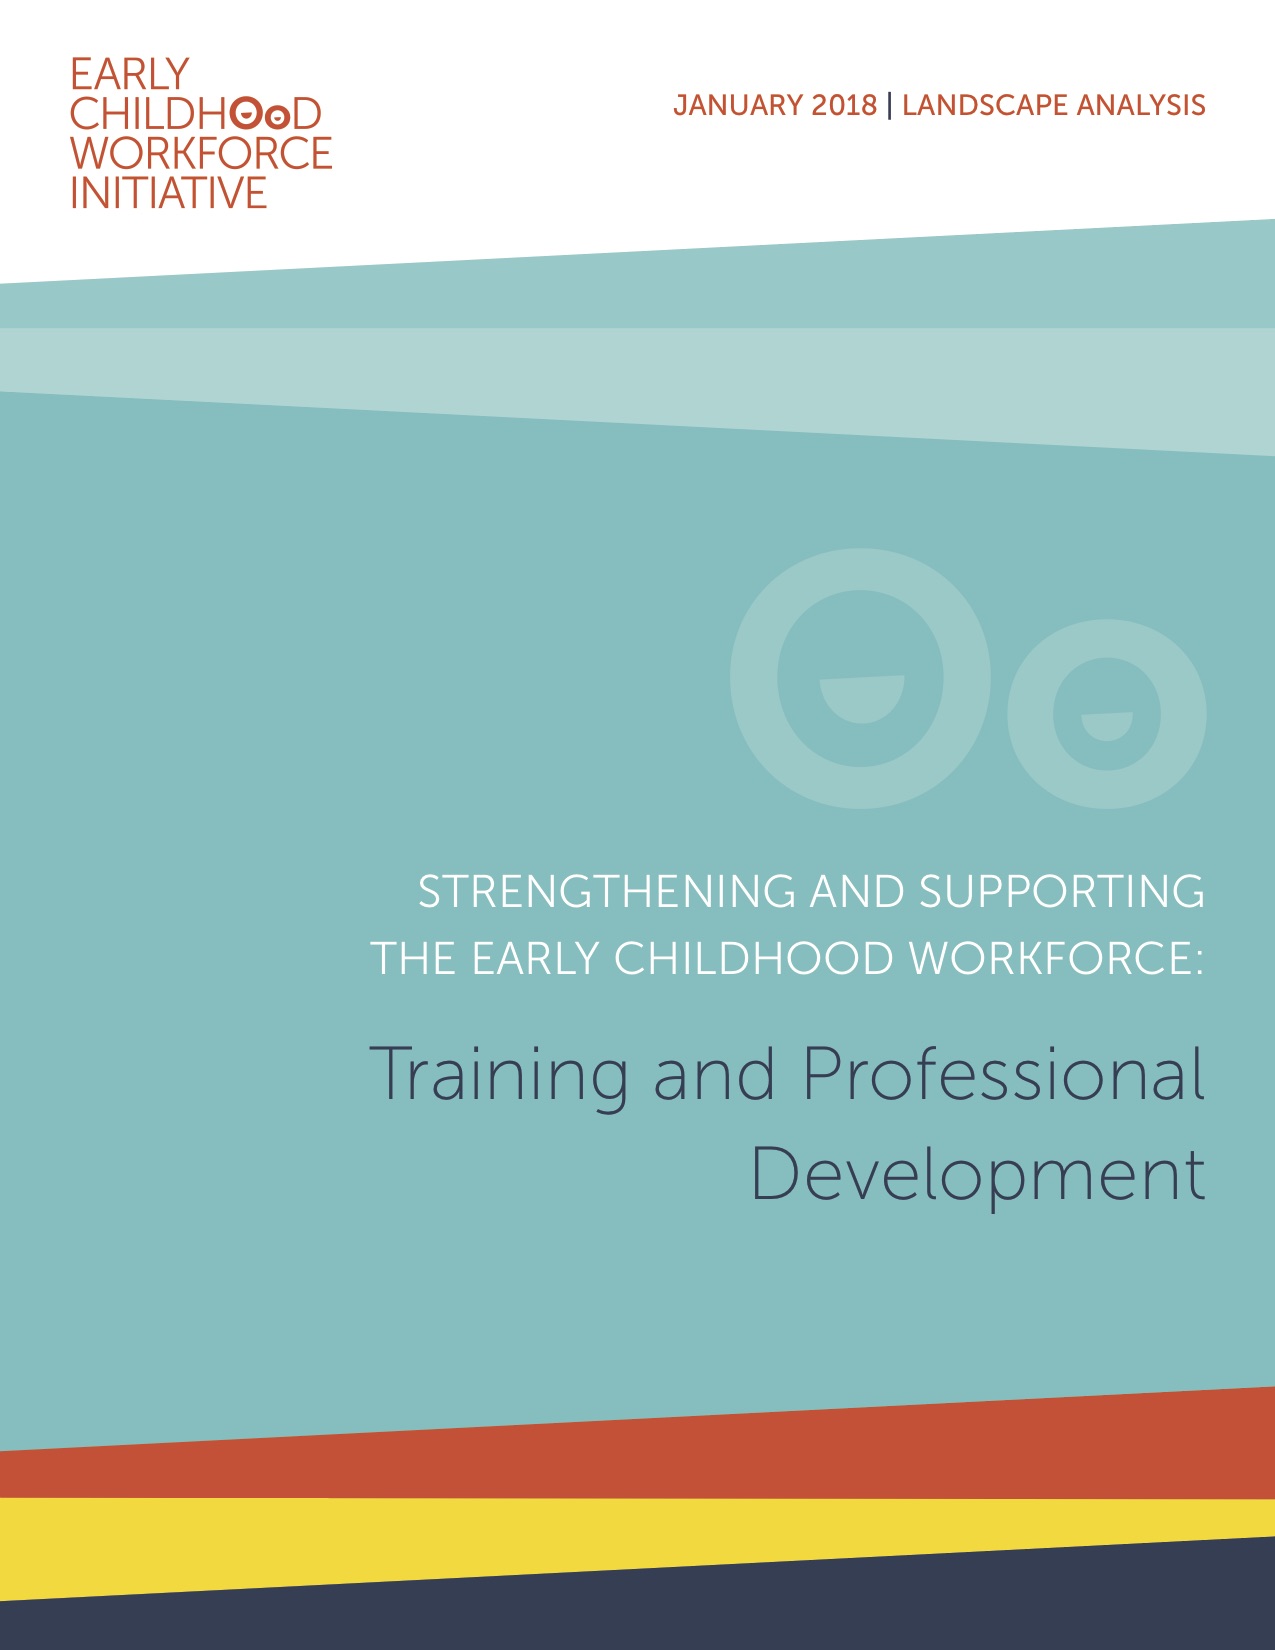 Training and Professional Development cover